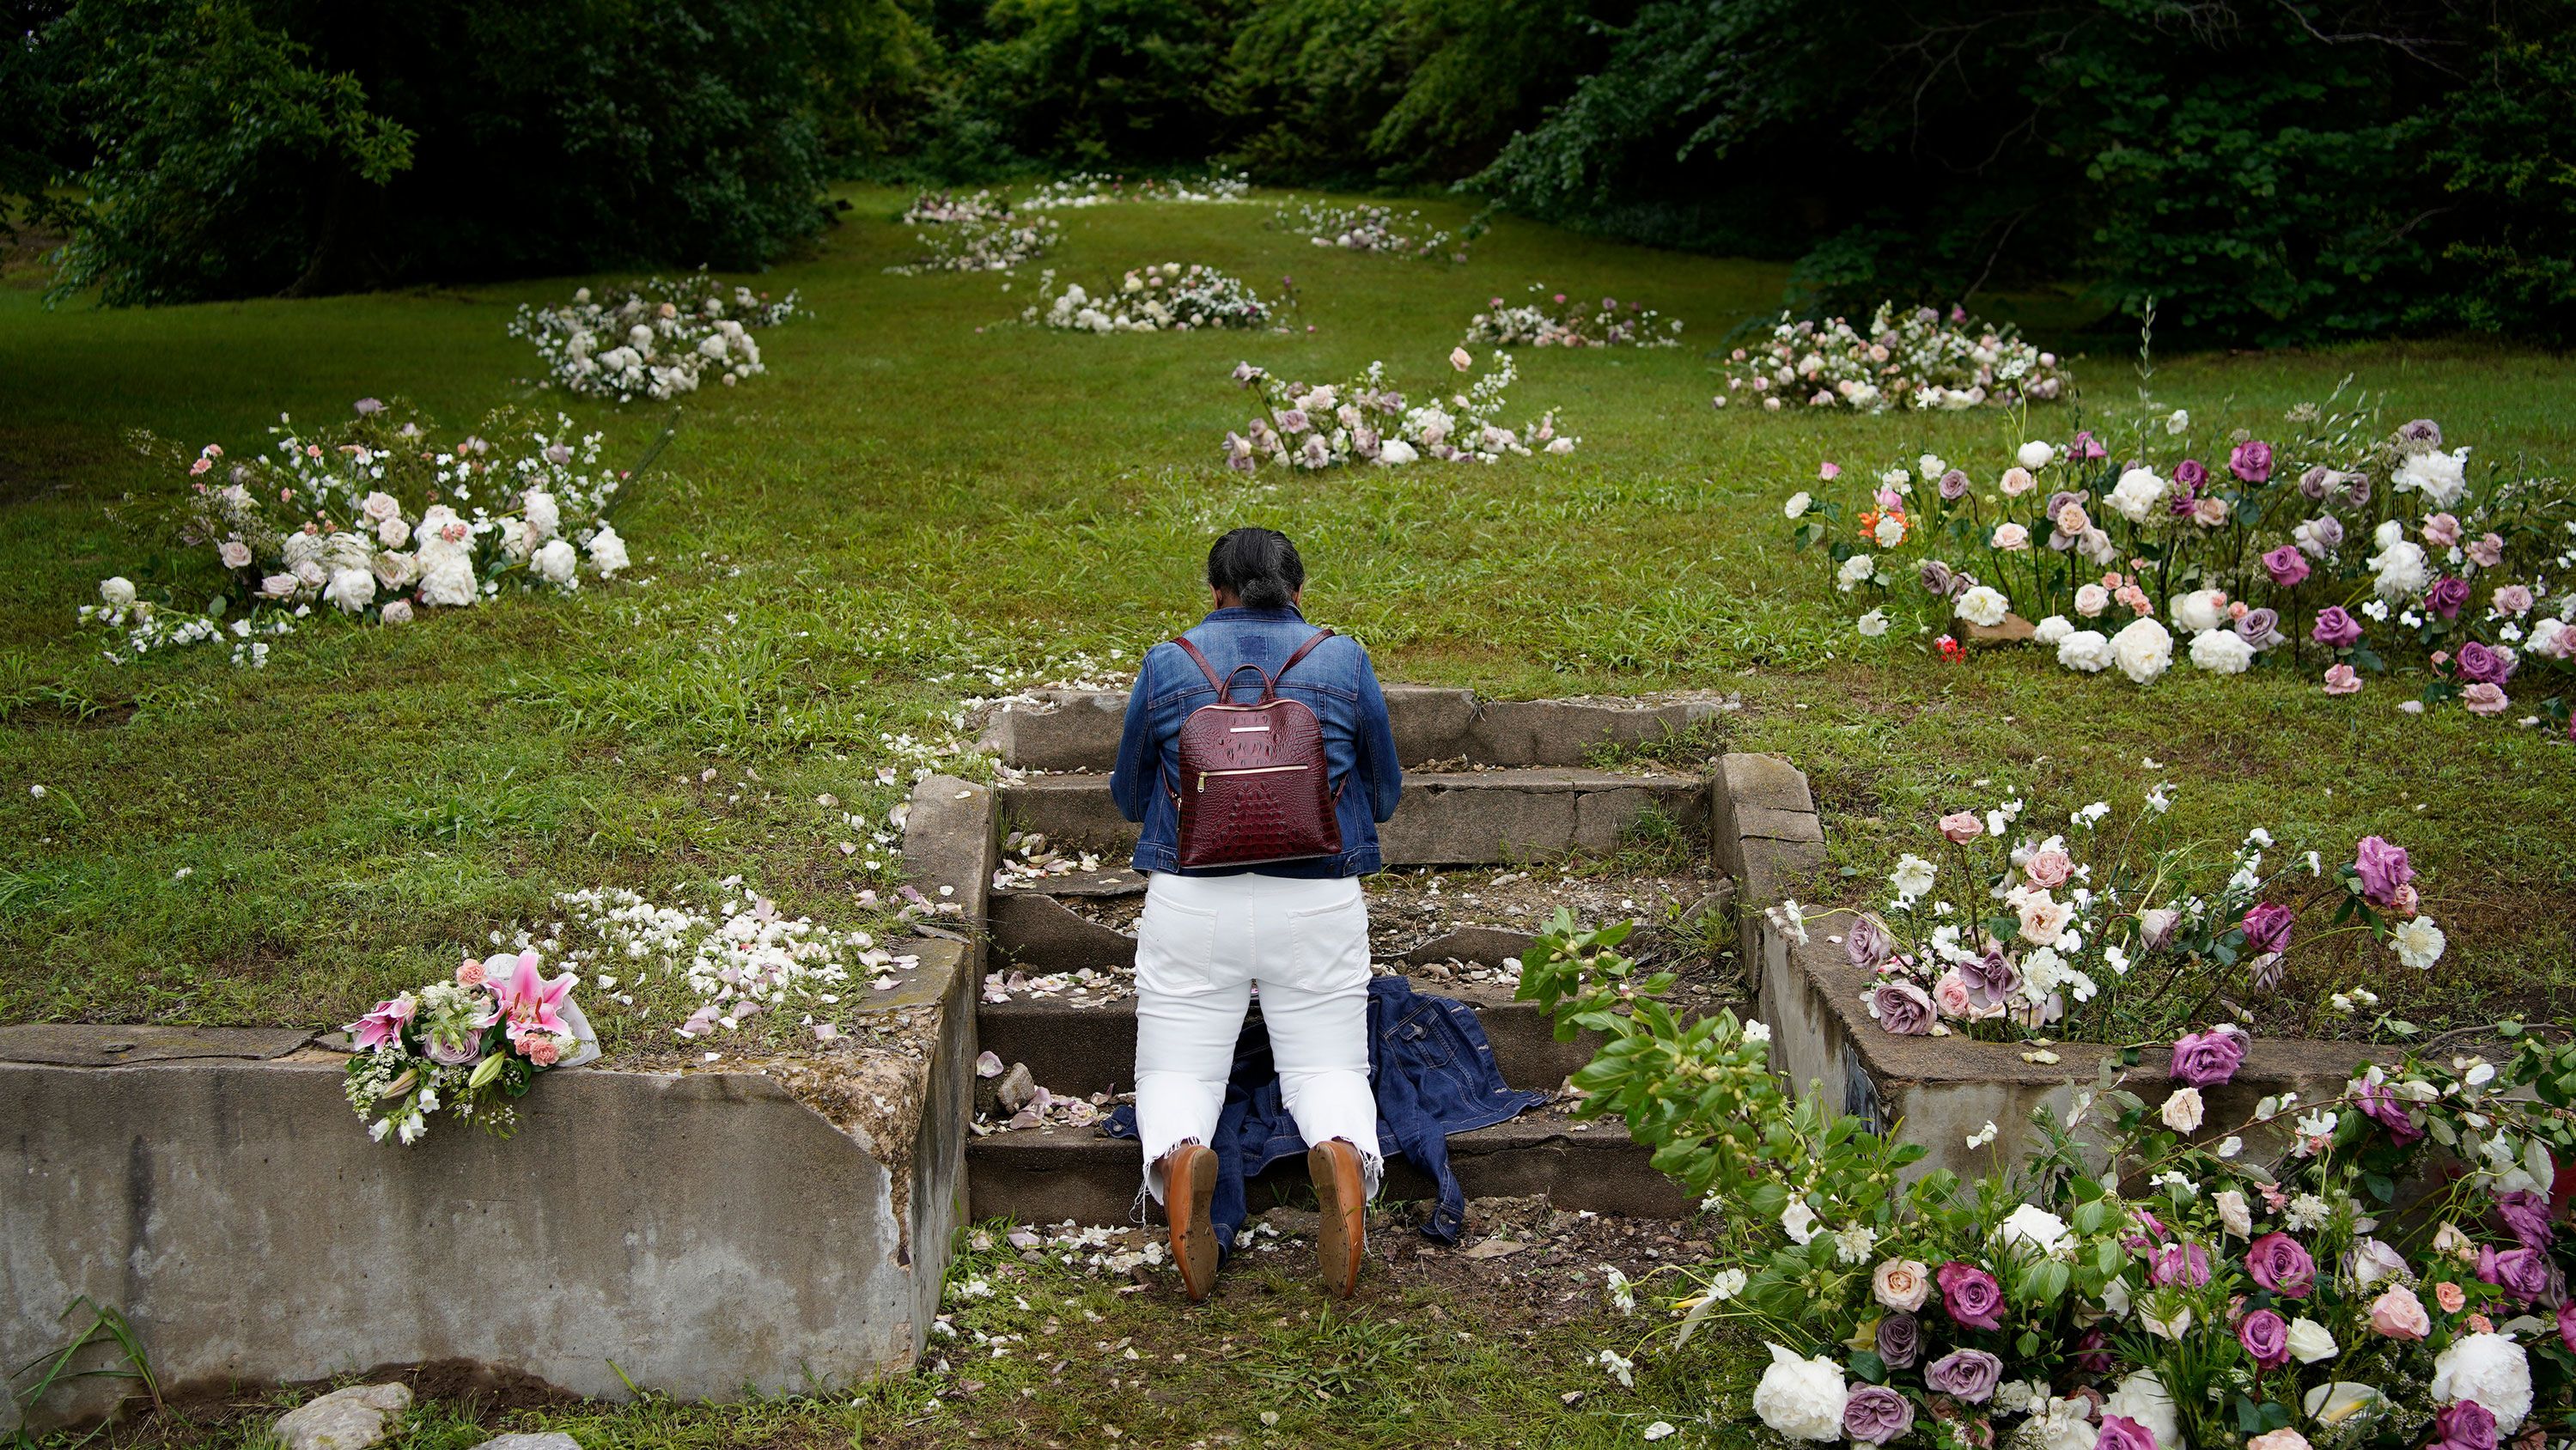 Linda Porter of Birmingham, Alabama, kneels at a makeshift memorial of flowers for the Tulsa Race Massacre at stairs leading to a now empty lot near the historic Greenwood district during centennial commemorations on Tuesday in Tulsa.